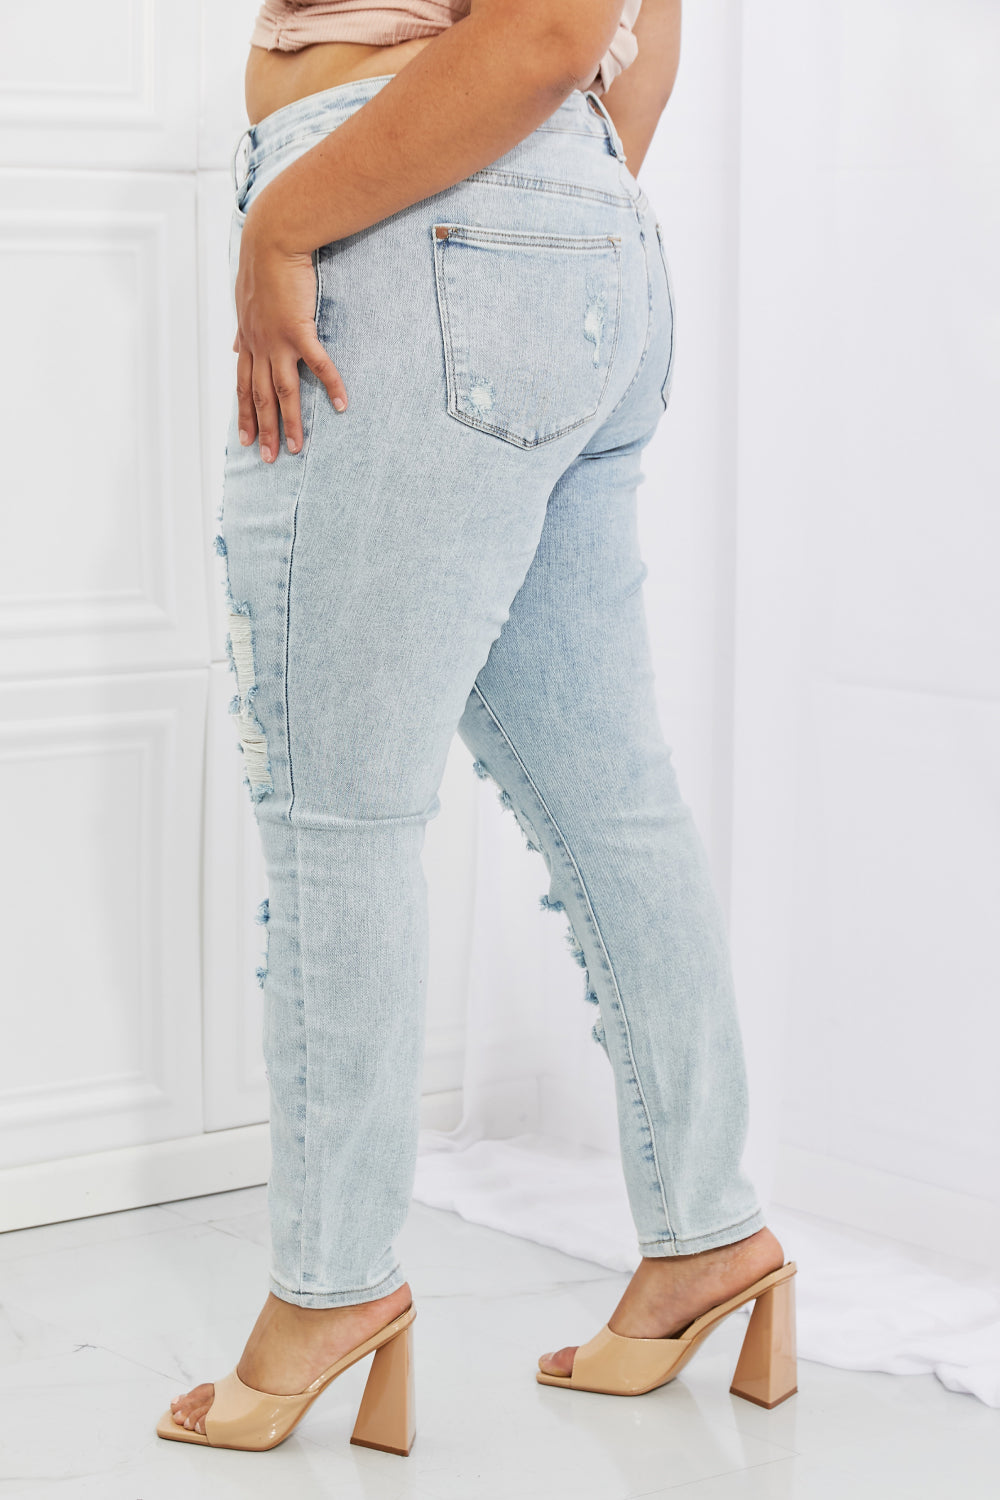 *Exclusively Online* Judy Blue Tiana High Waisted Distressed Skinny Jeans